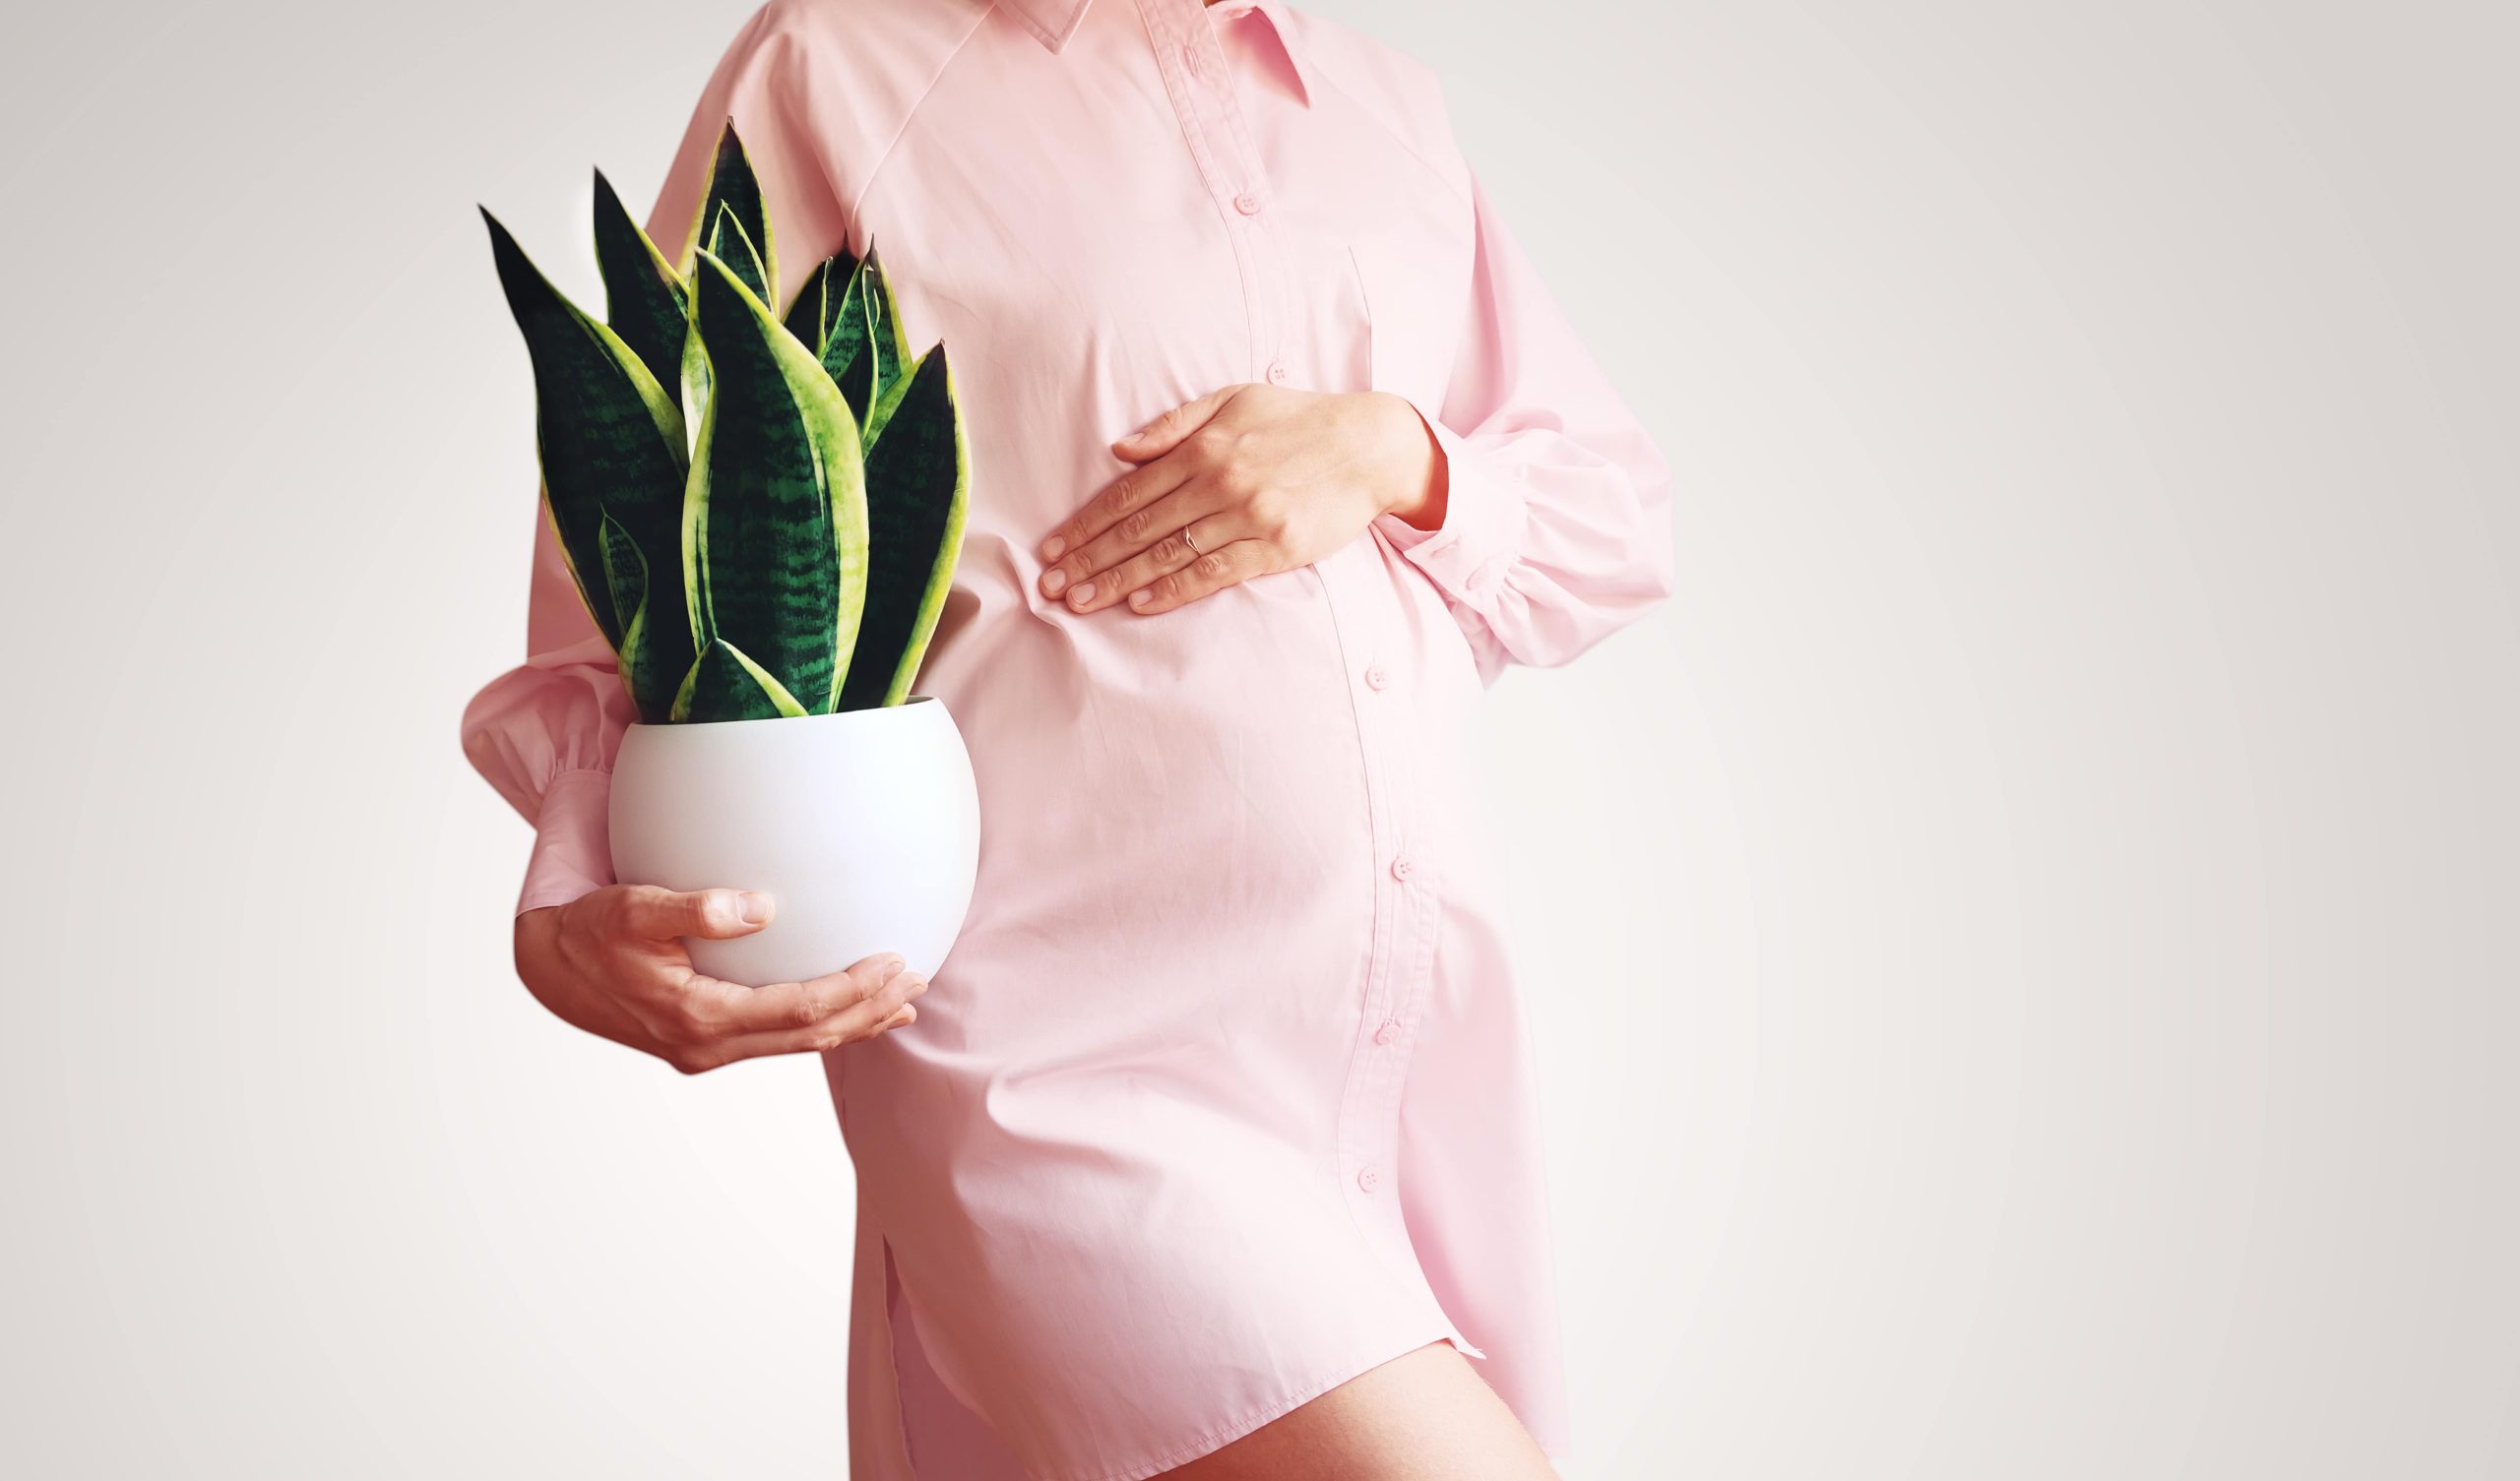 pregnant-woman-with-green-plant-in-hands